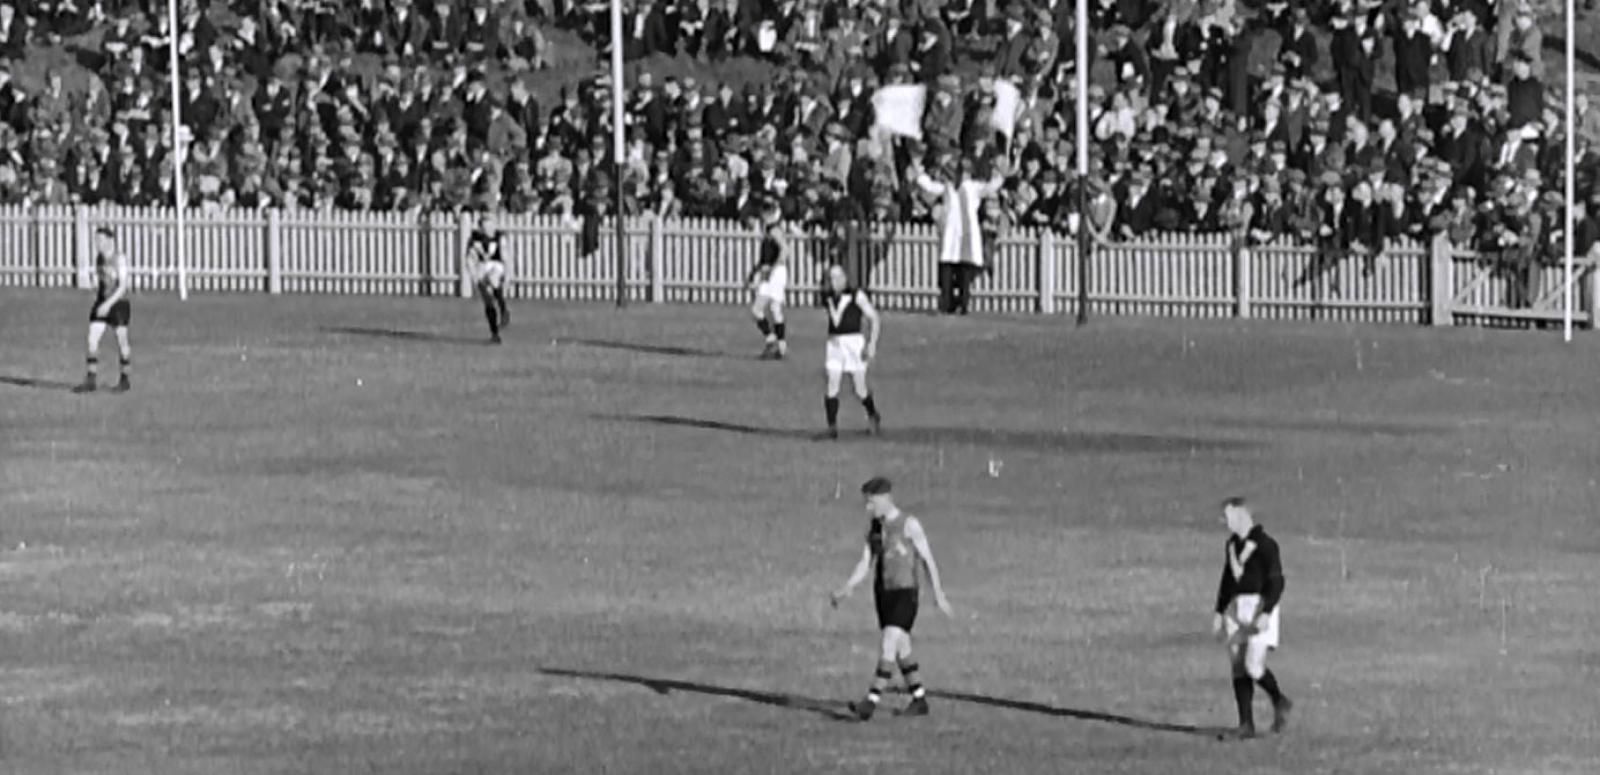 Black and white frame capture of the AFL goal umpire waving two flags signalling a six point score.